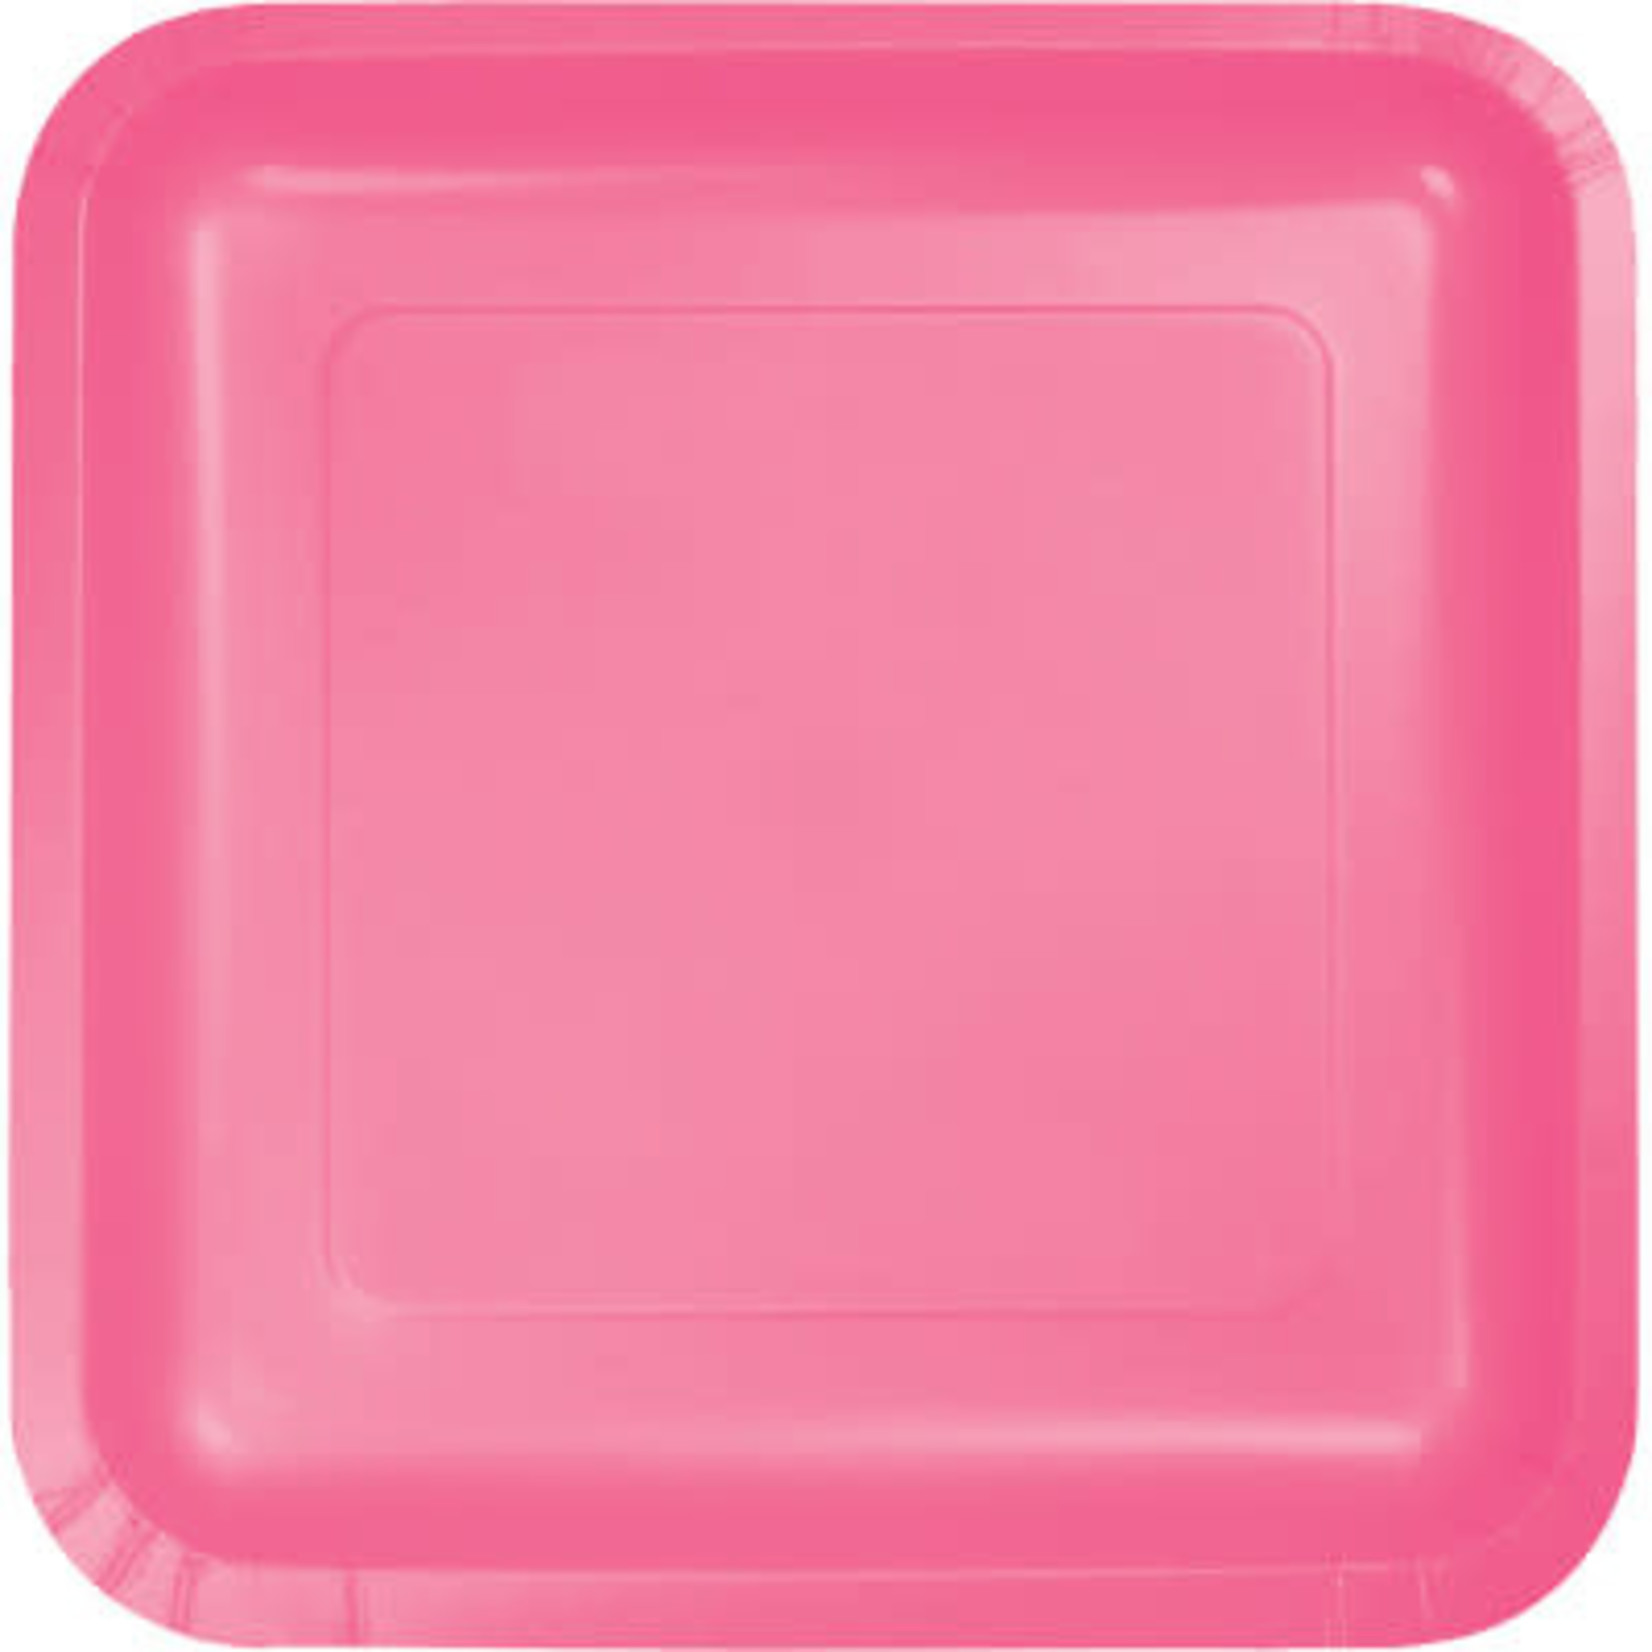 Touch of Color 9" Candy Pink Square Paper Pinks - 18ct.